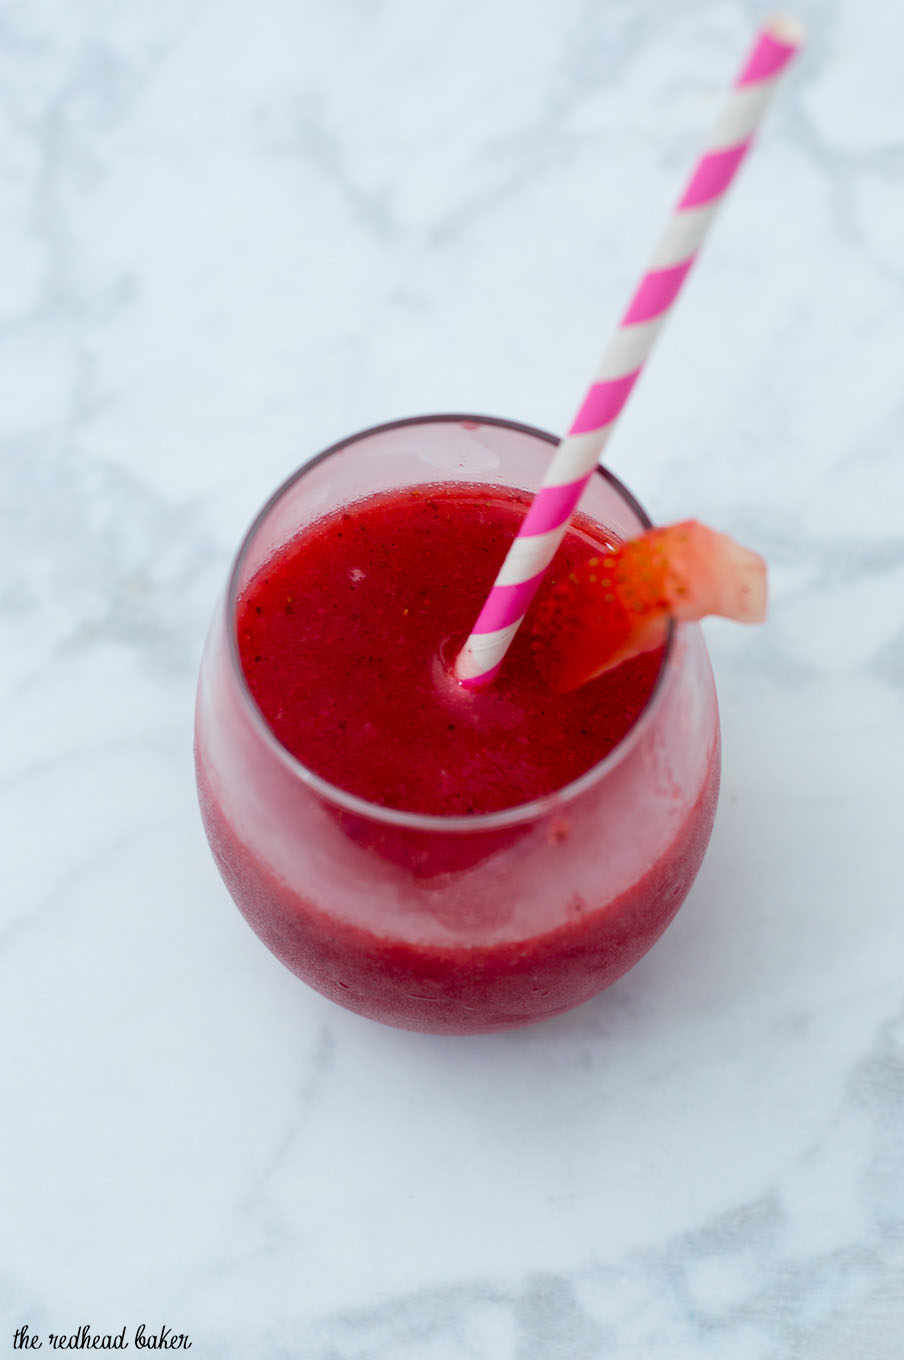 Strawberry sangria slushies are a fun frozen cocktail — white wine blends with frozen strawberries and triple sec for a delicious summer treat!